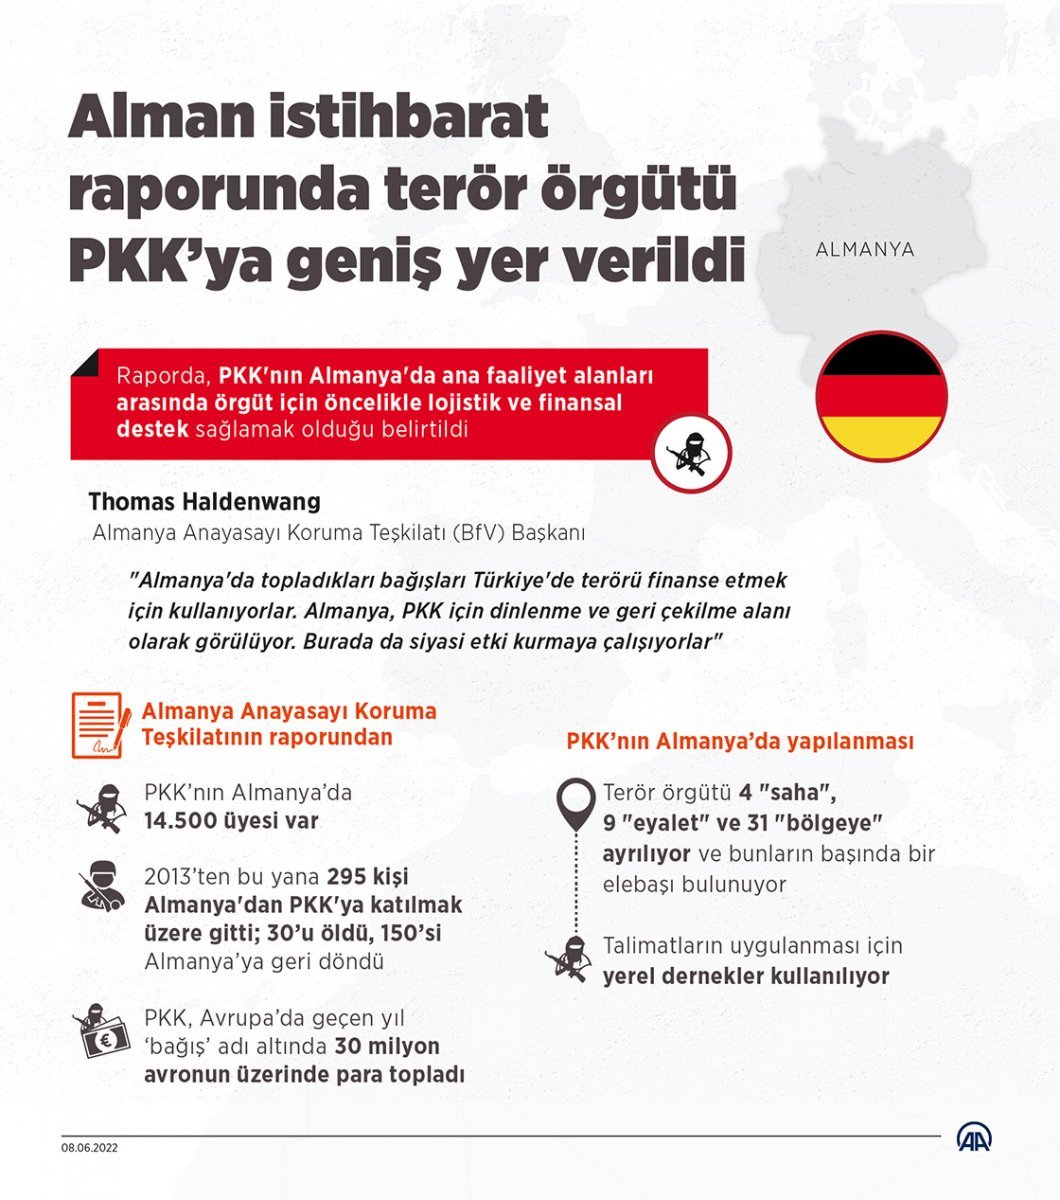 PKK's activities in Germany reflected in the intelligence report #5